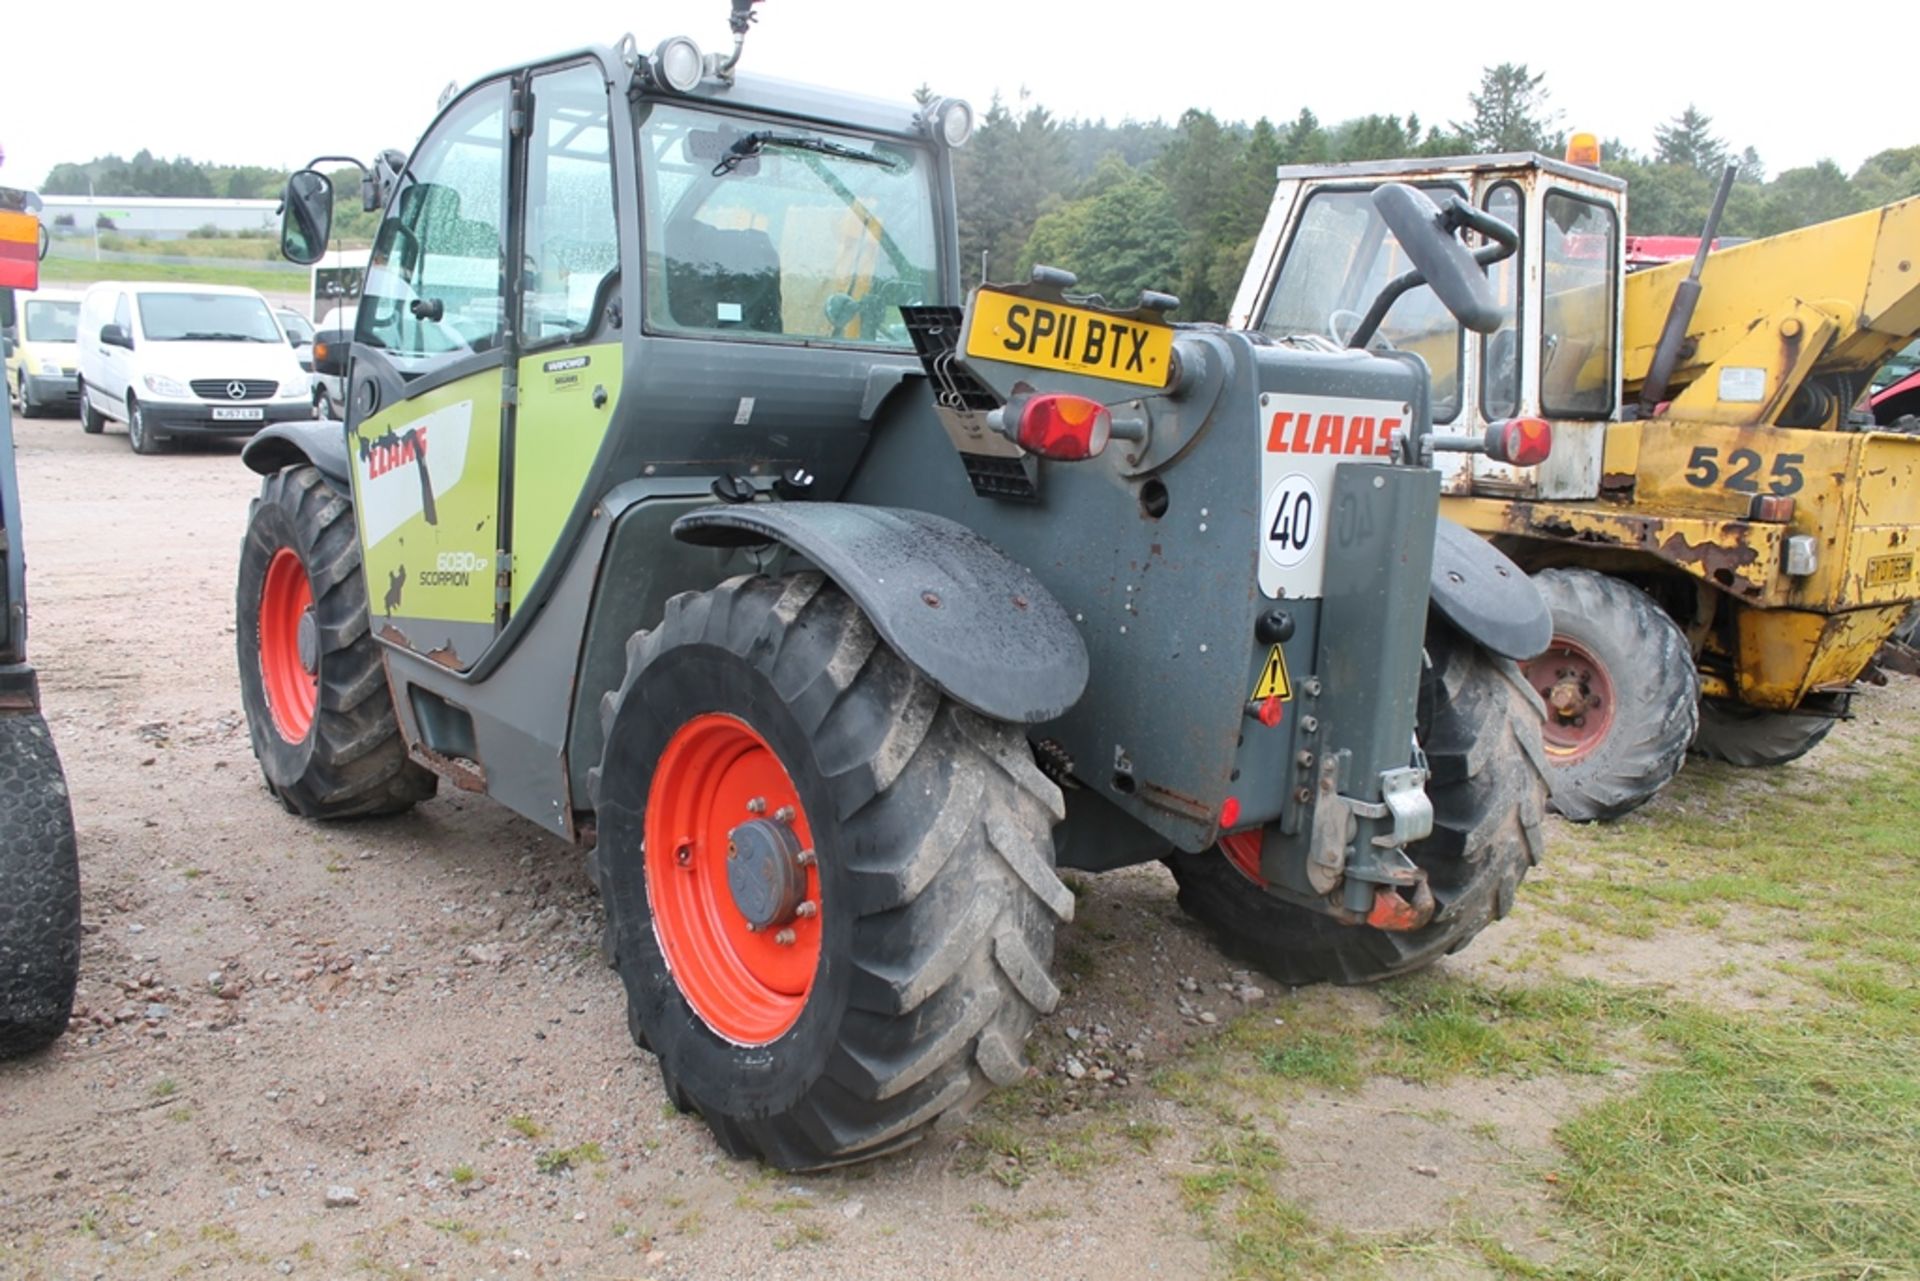 Claas G030 CP - 4040cc Tractor - Image 2 of 4